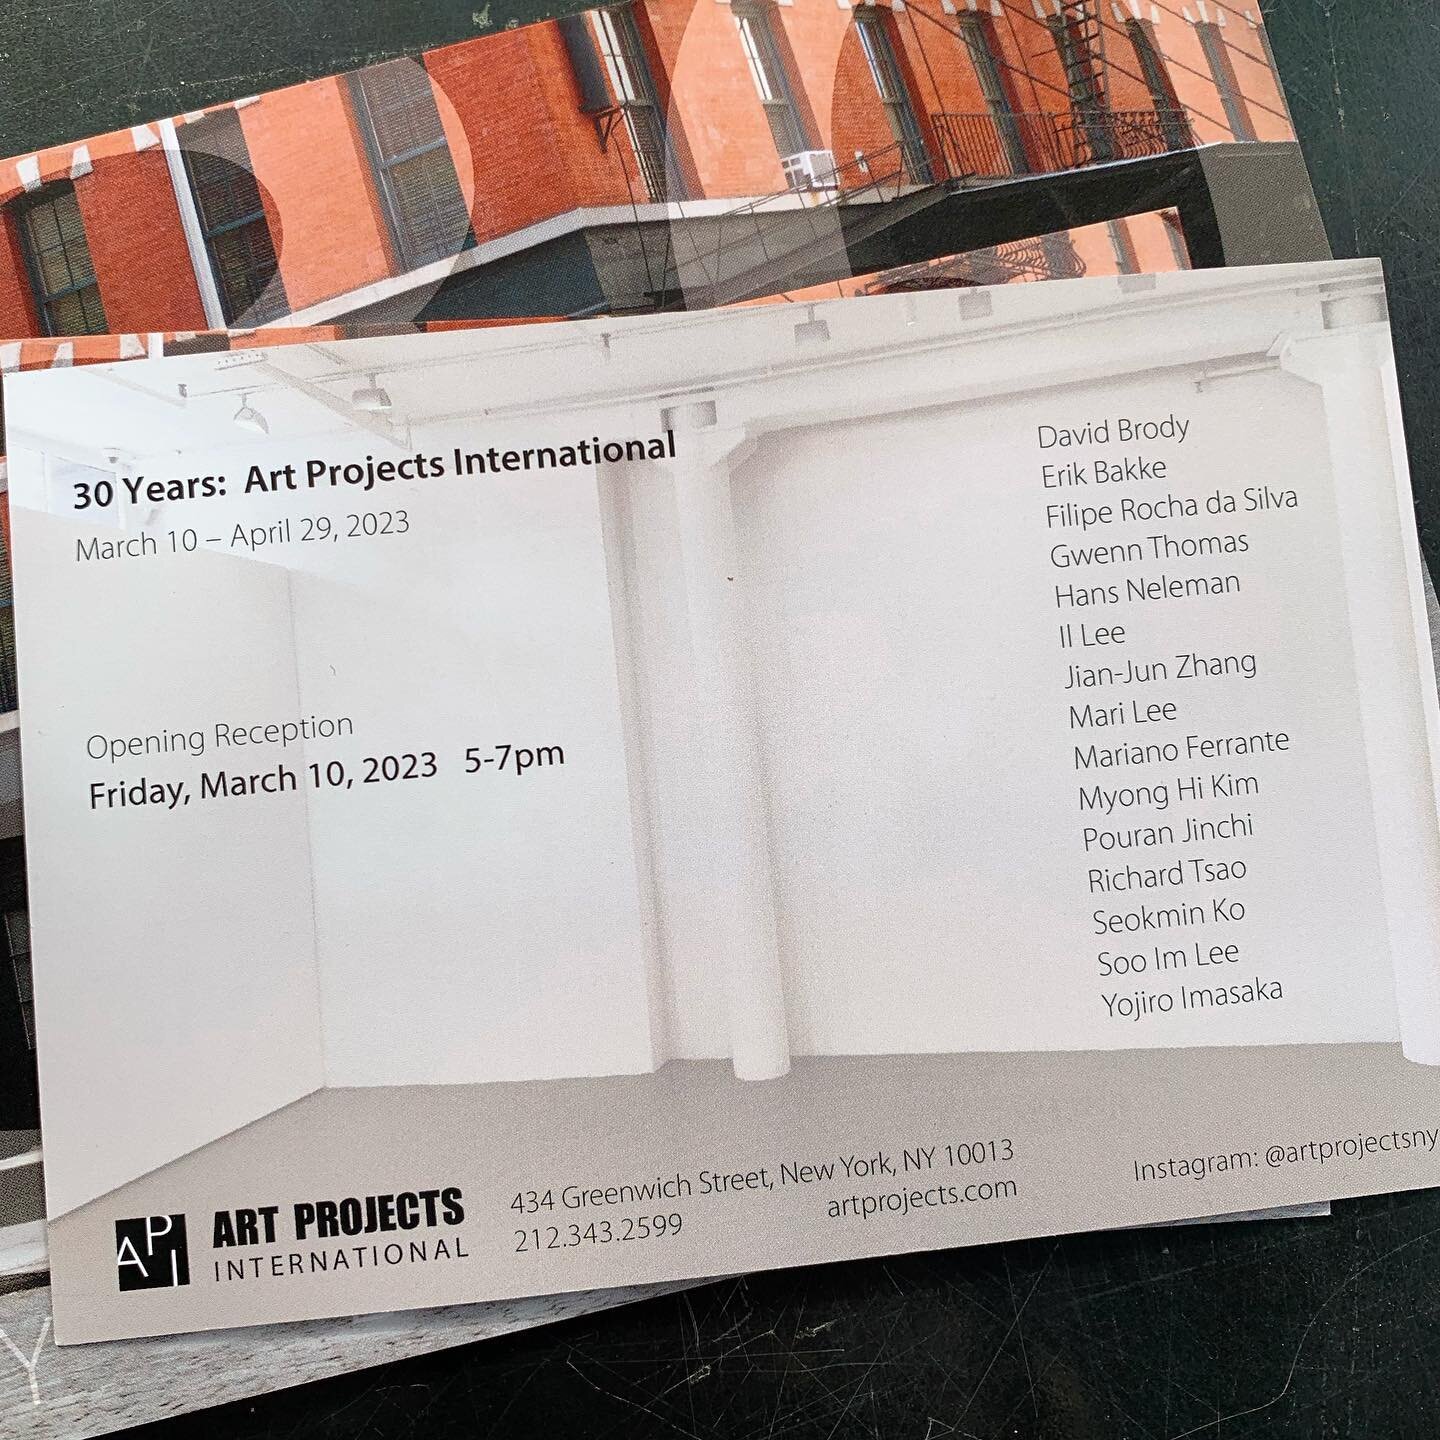 Art Projects International is celebrating the gallery&rsquo;s 30-year anniversary with a special exhibition 30 Years: Art Projects International opens on March 10, 2023.
Opening Reception March 10 5-7 pm.
Art Projects International.
434 Greenwich Str